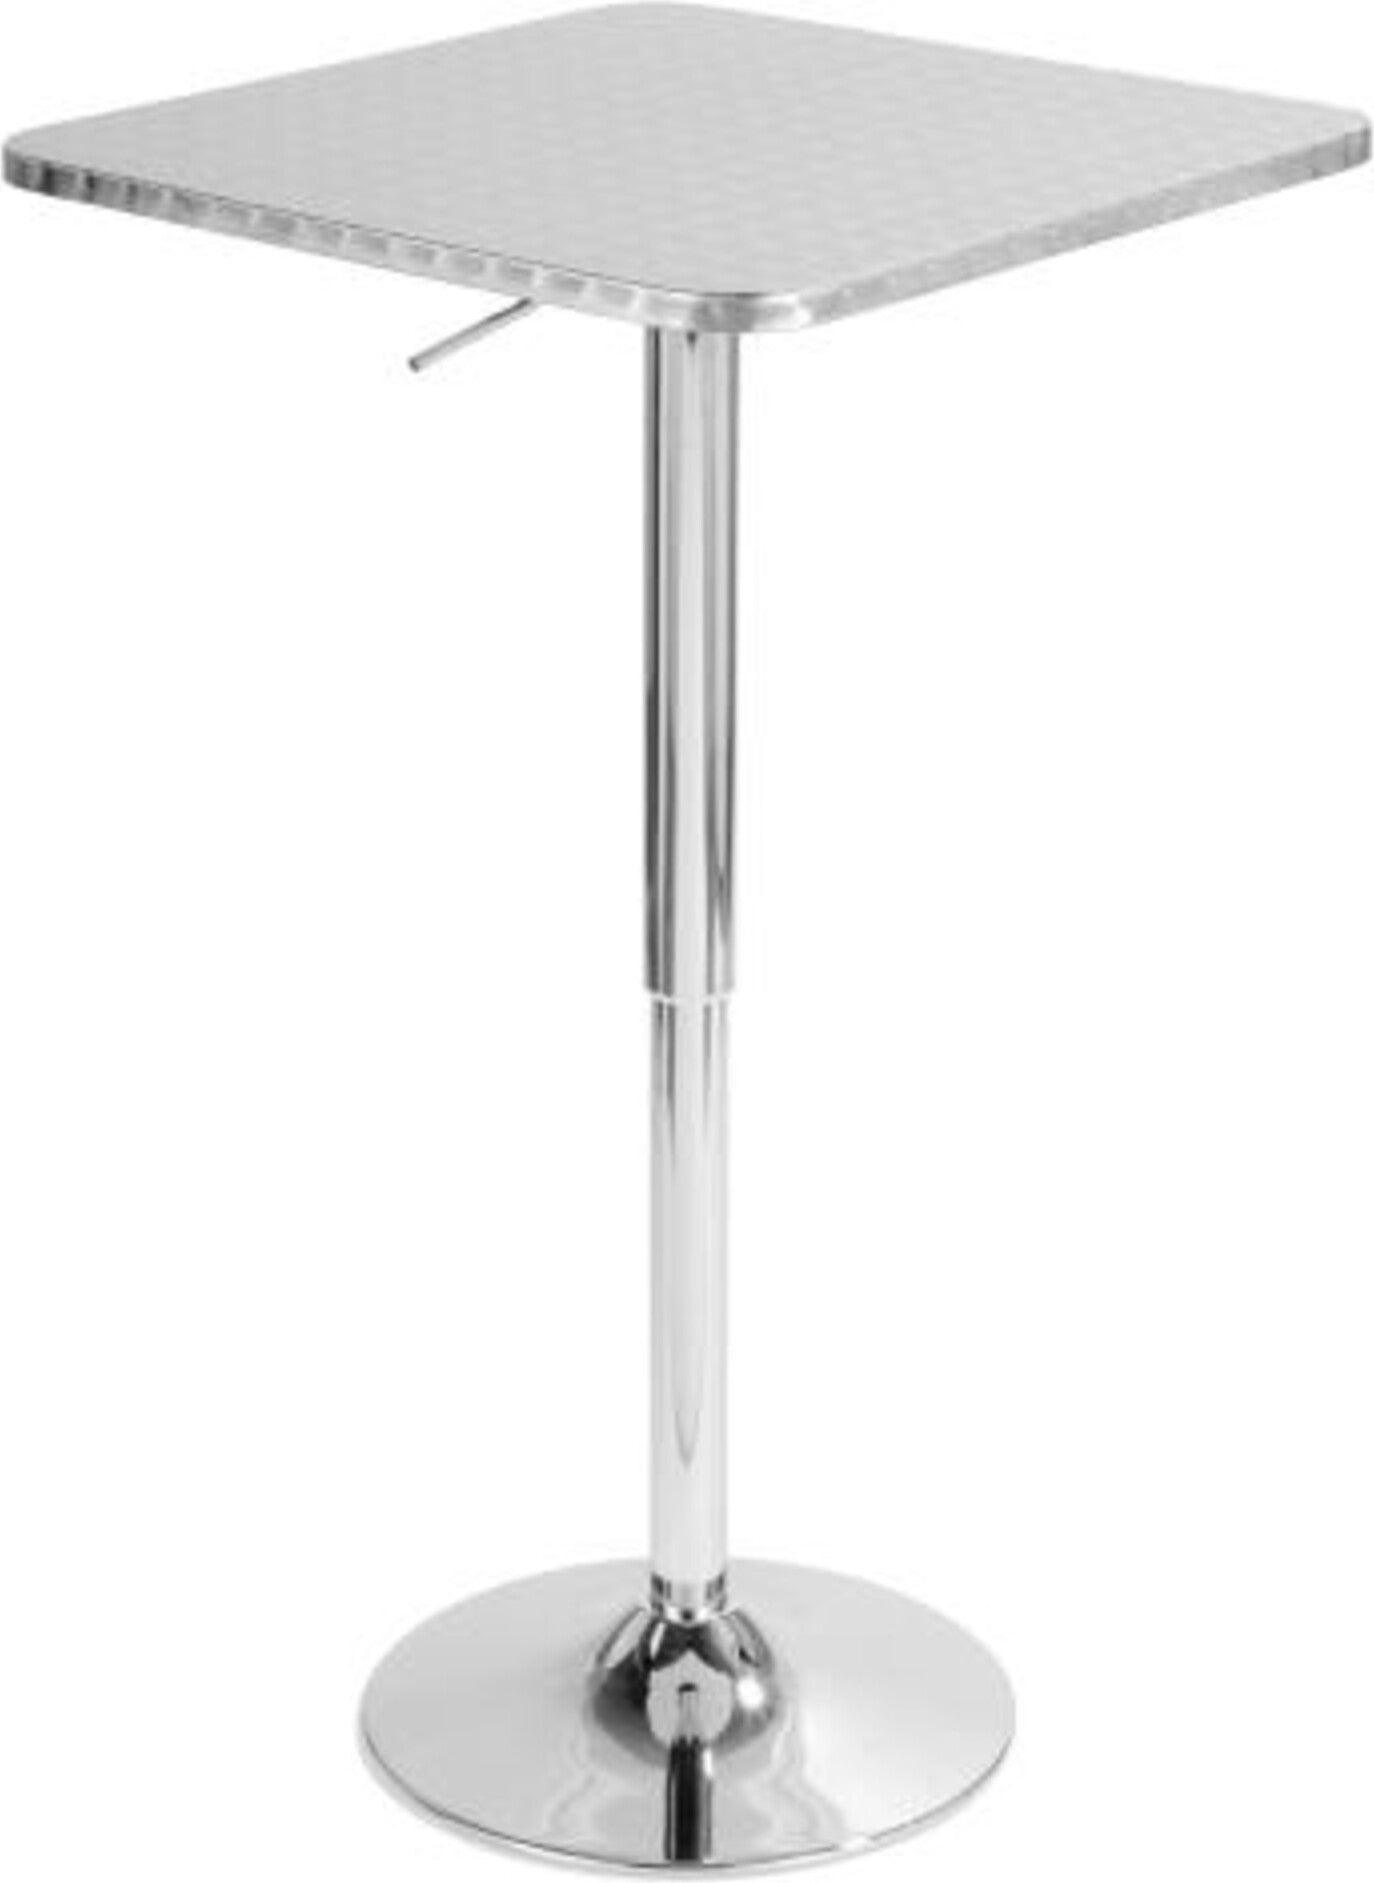 Lumisource Bar Tables - Bistro Contemporary Adjustable Square Bar Table in Silver